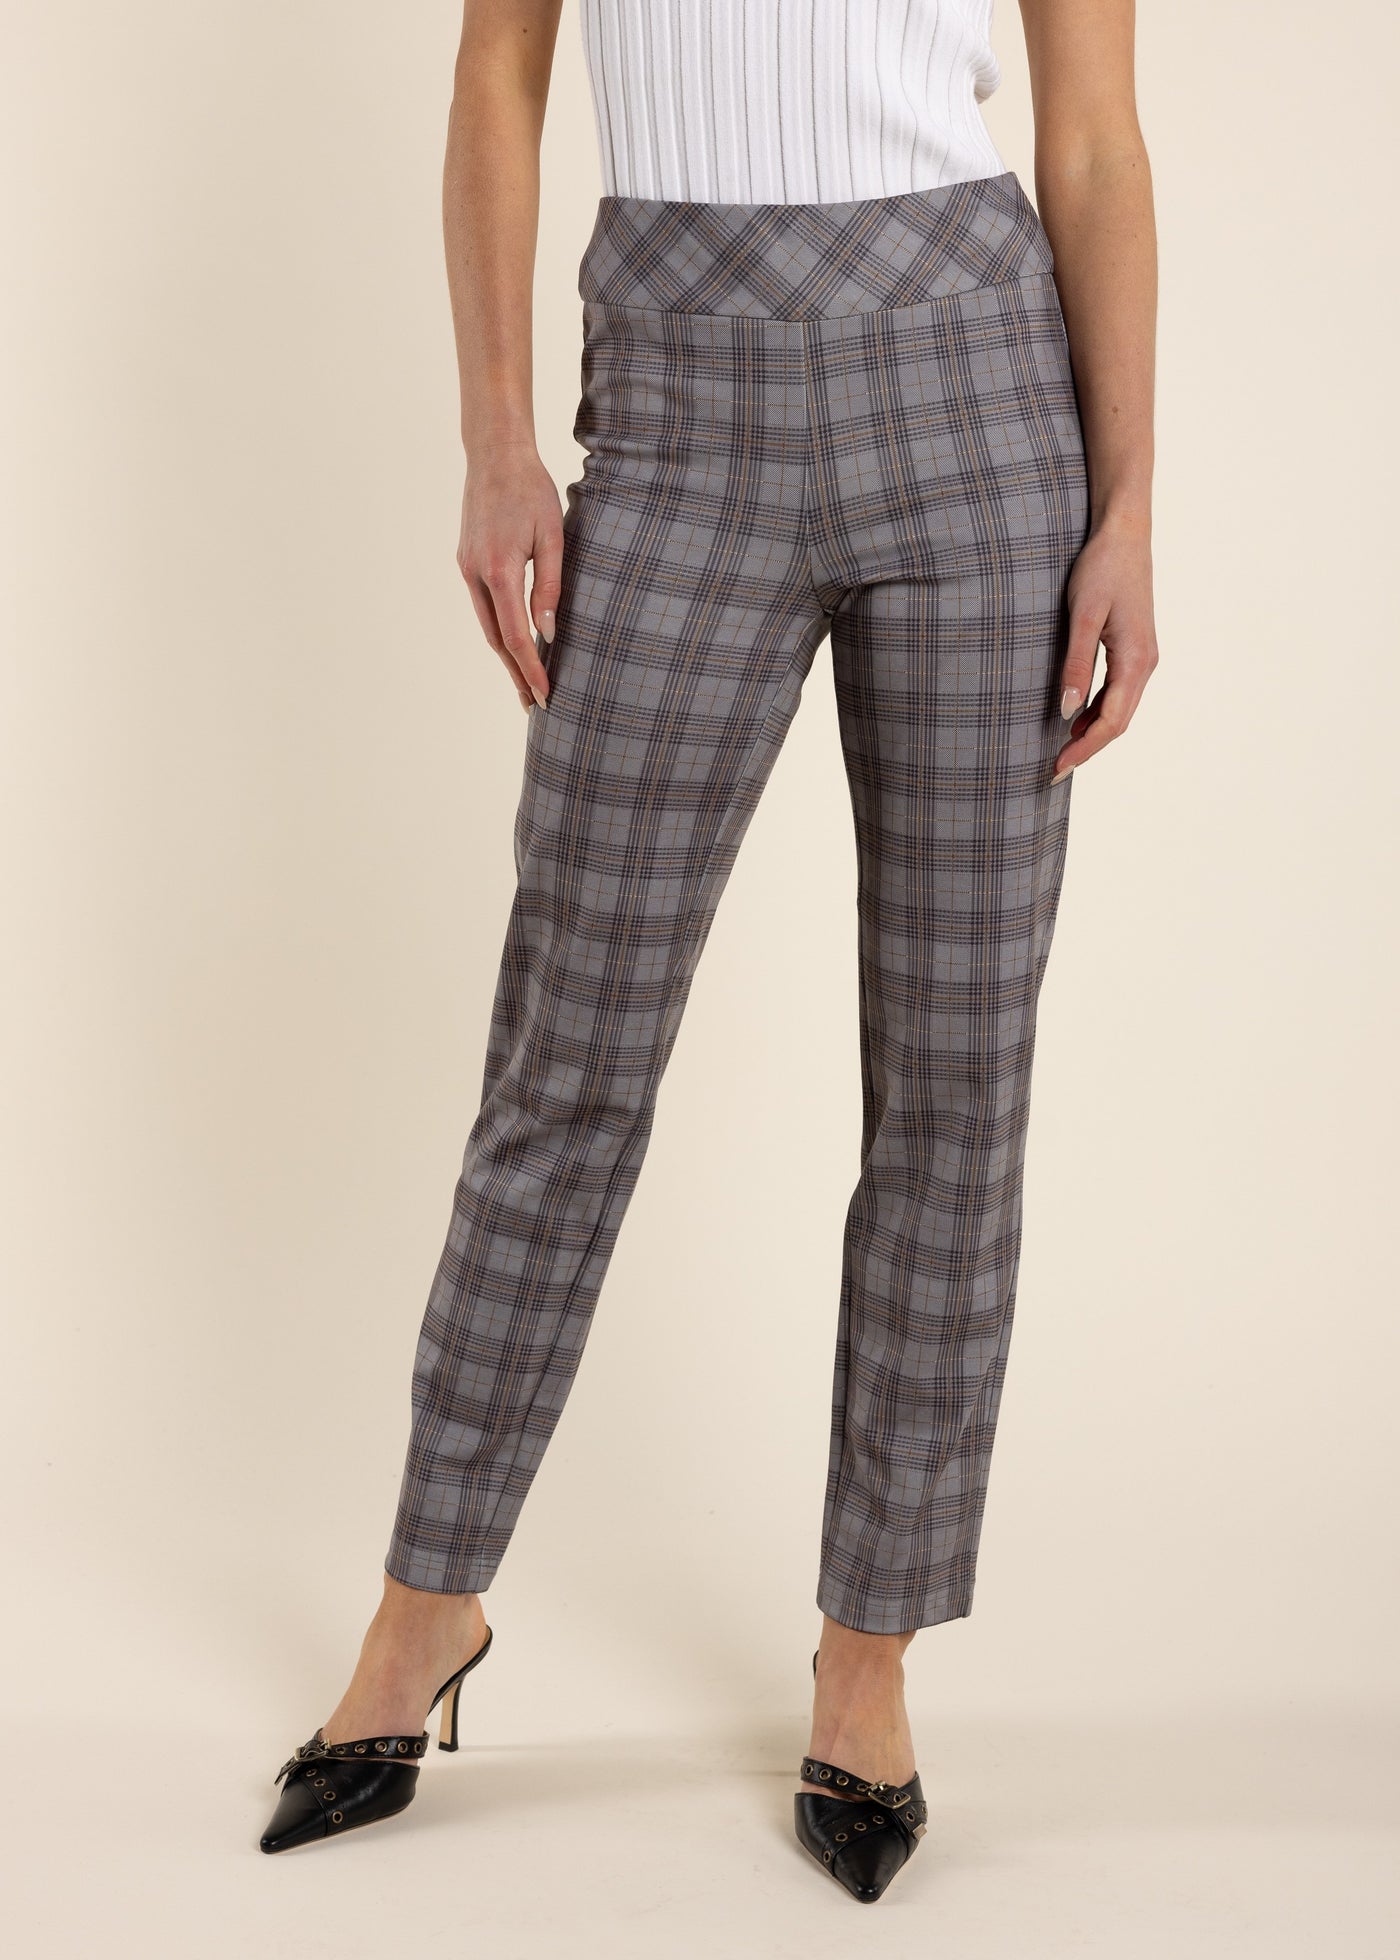 TWO-T's</p>Check Pull On Pant</p>(Clove Check)